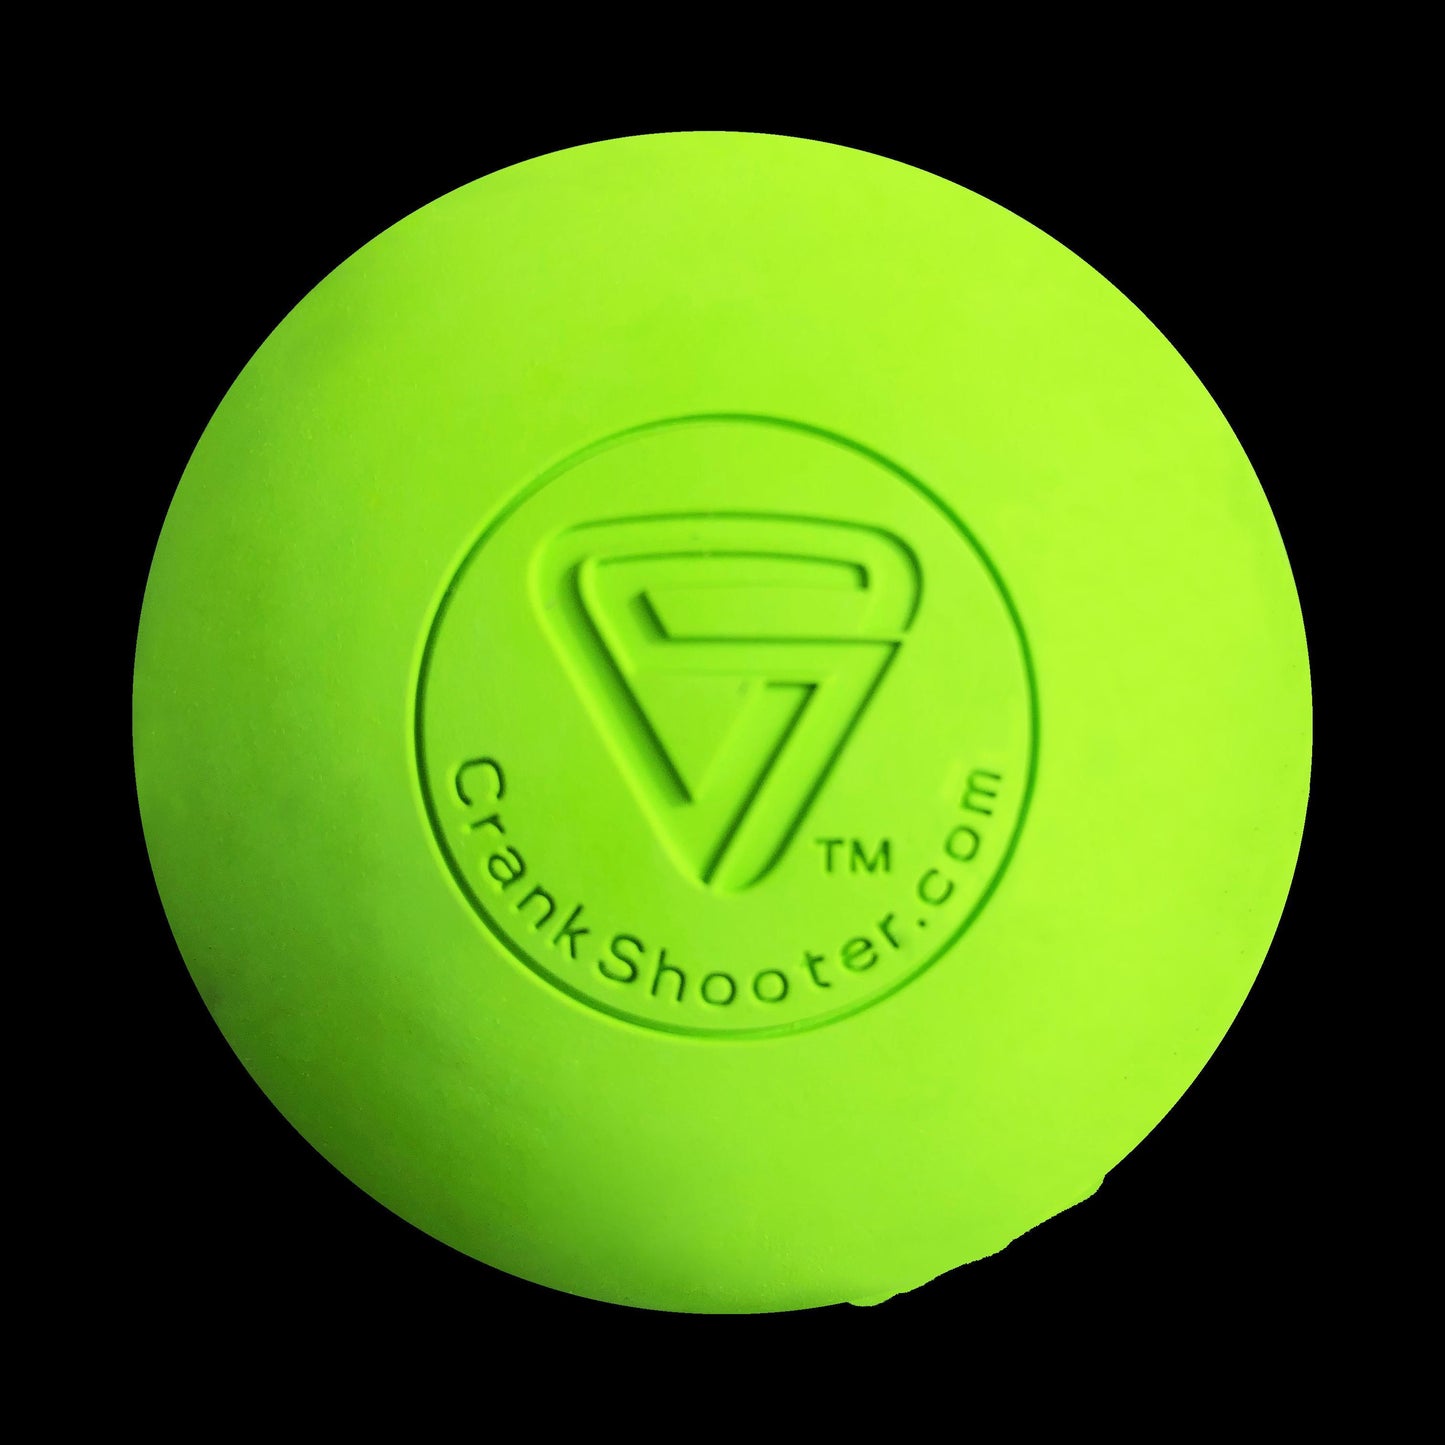 Ball Bag + 60 Balls Combo, Perfect for Coaches, by Crankshooter®